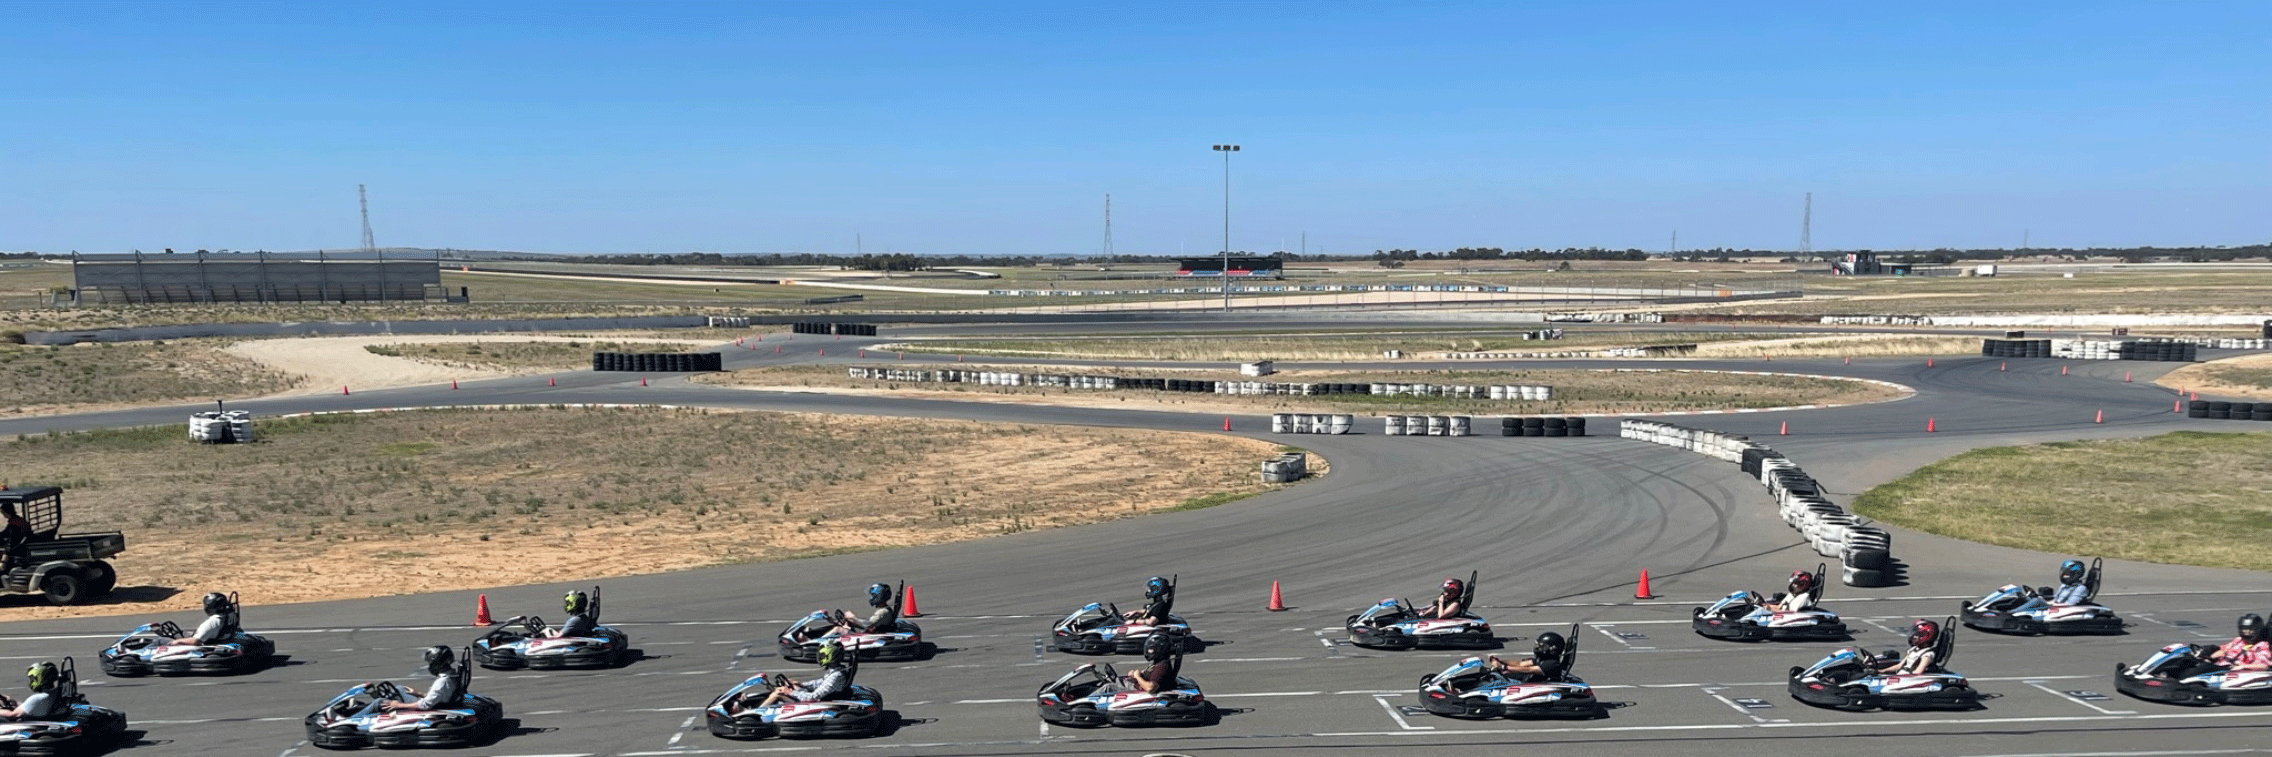 MBA students at the The Bend Motorsport Park on the race track